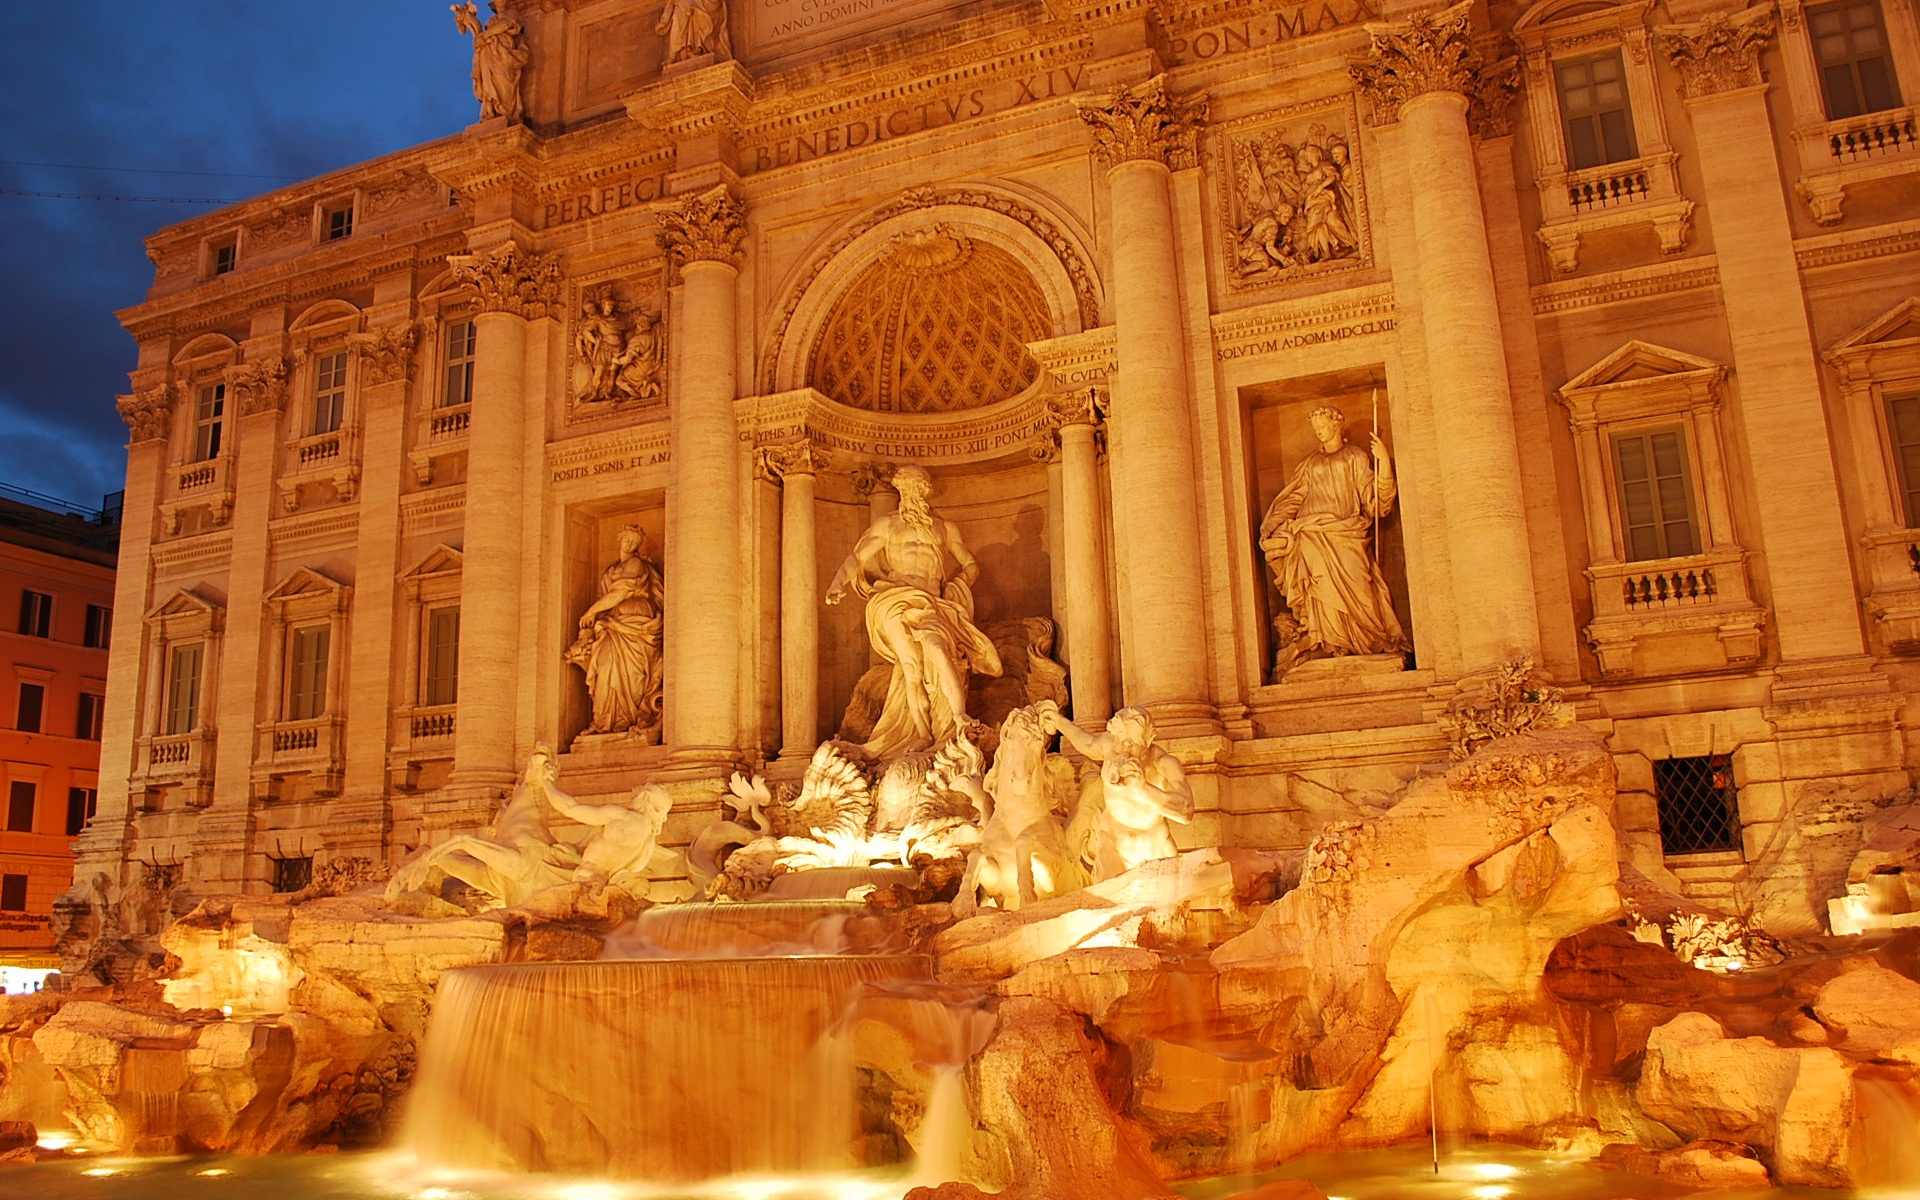 statue, man made, trevi fountain, building, monuments images